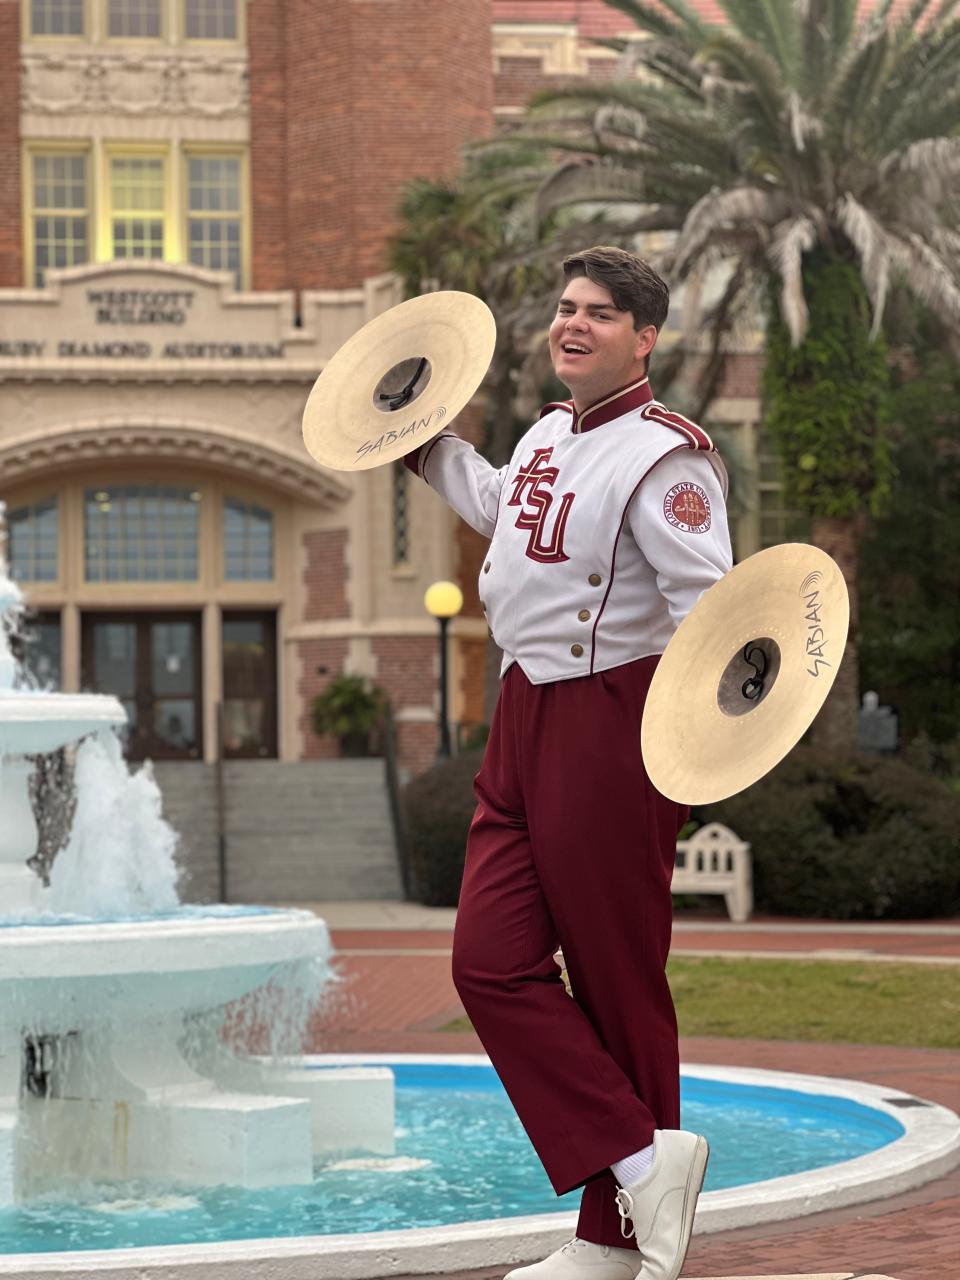 Aidan Wester is a junior at Florida State University and is a cymbal player on FSU's Marching Chiefs band.